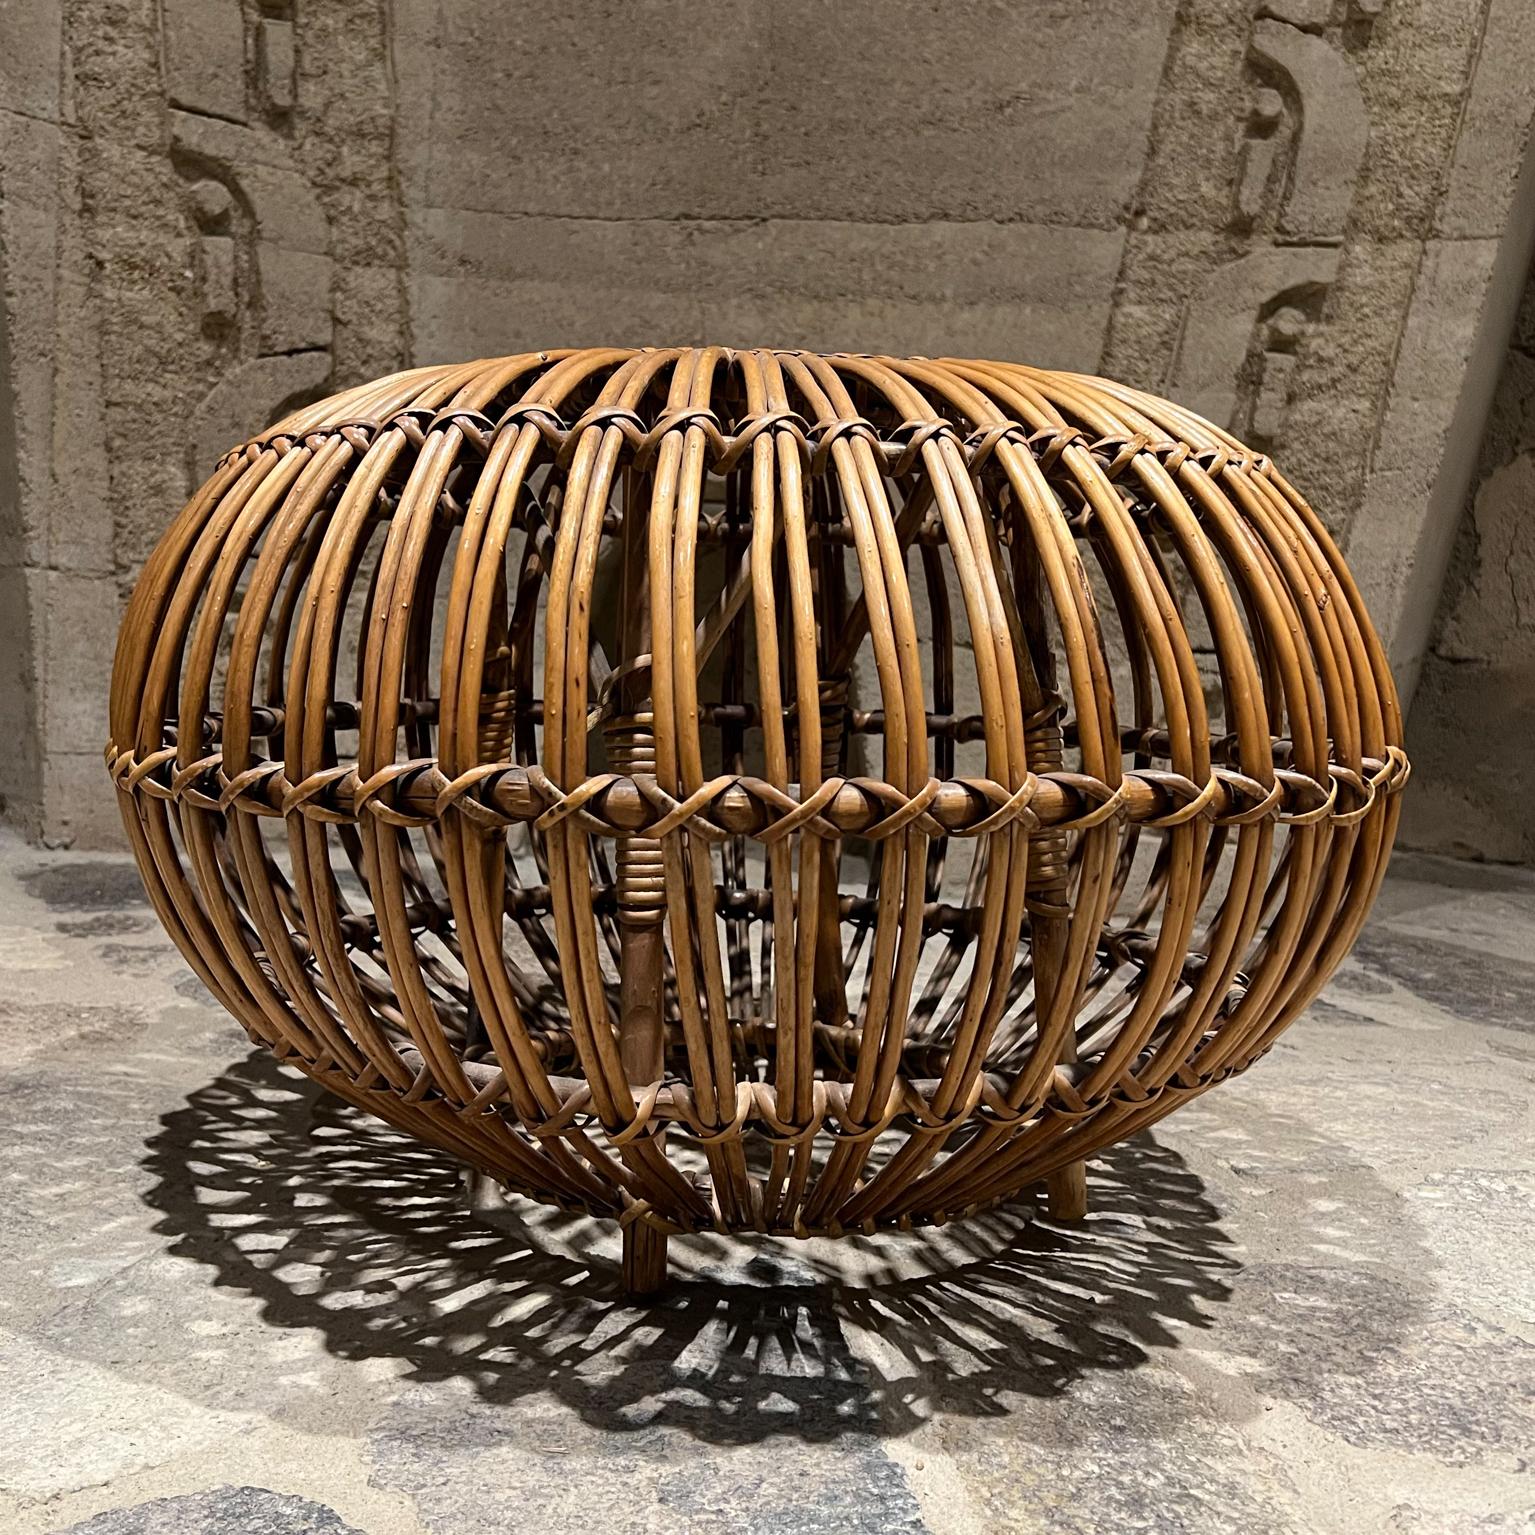 Ottoman stool
Franco Albini ottoman large Pouf in Rattan from Italy
Unmarked
Measures: 23.5 diameter x 15.75 height inches
Preowned original unrestored vintage condition. It has slight damage at top missing cane.
Firm and sturdy.
See images